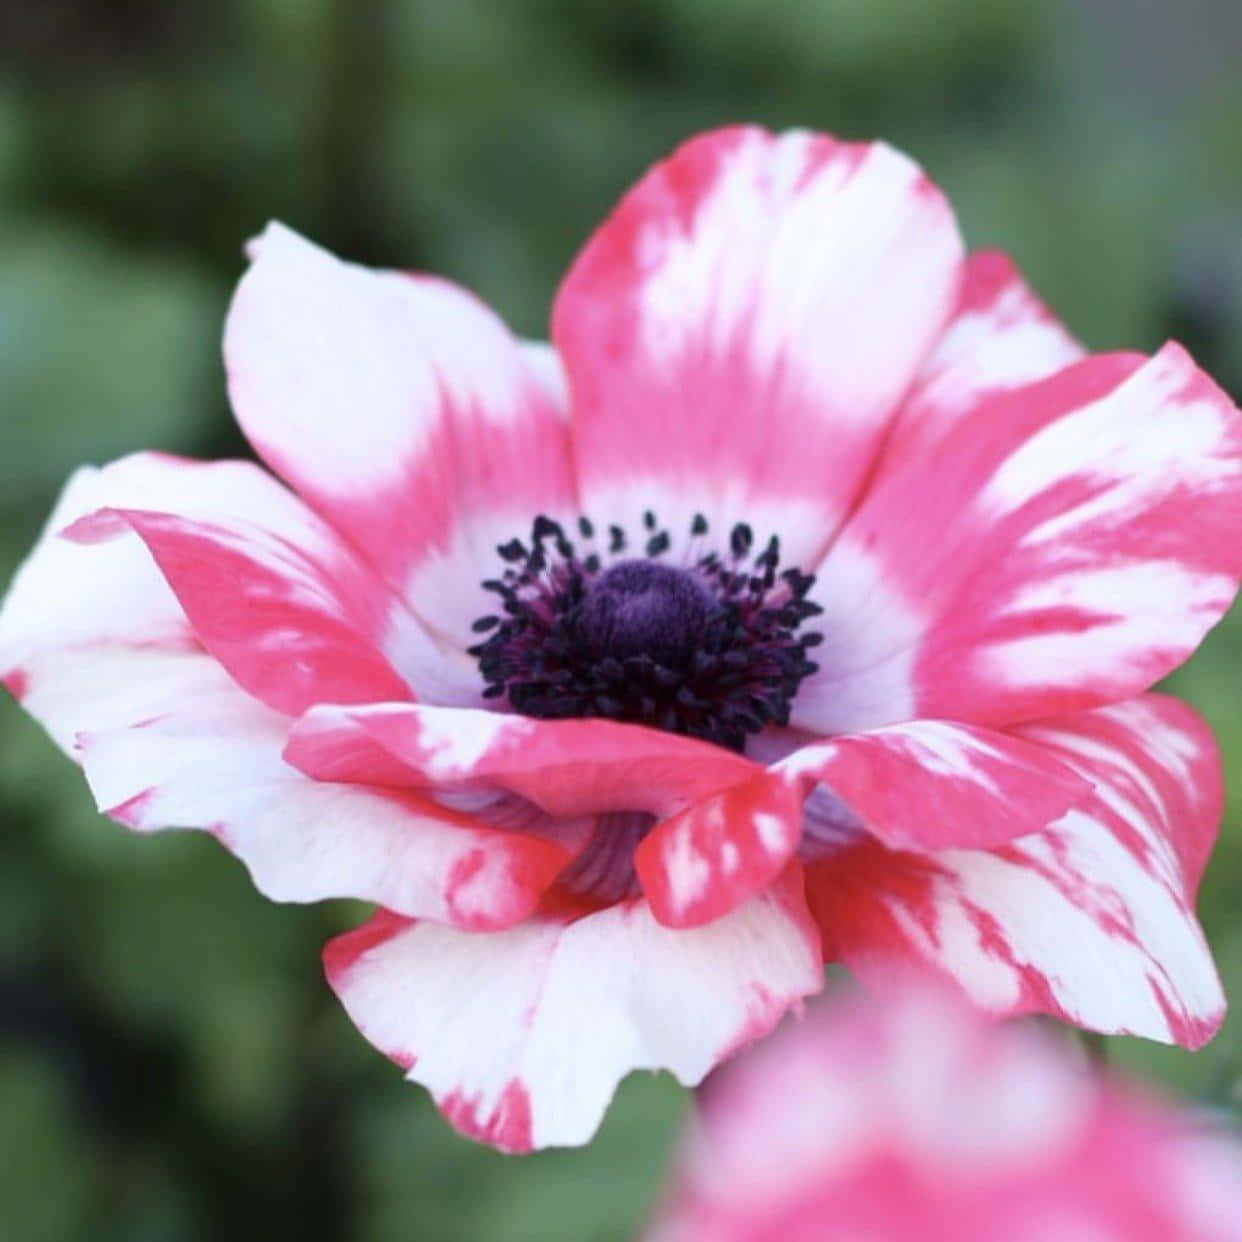 A Pink And White Flower With A White Center